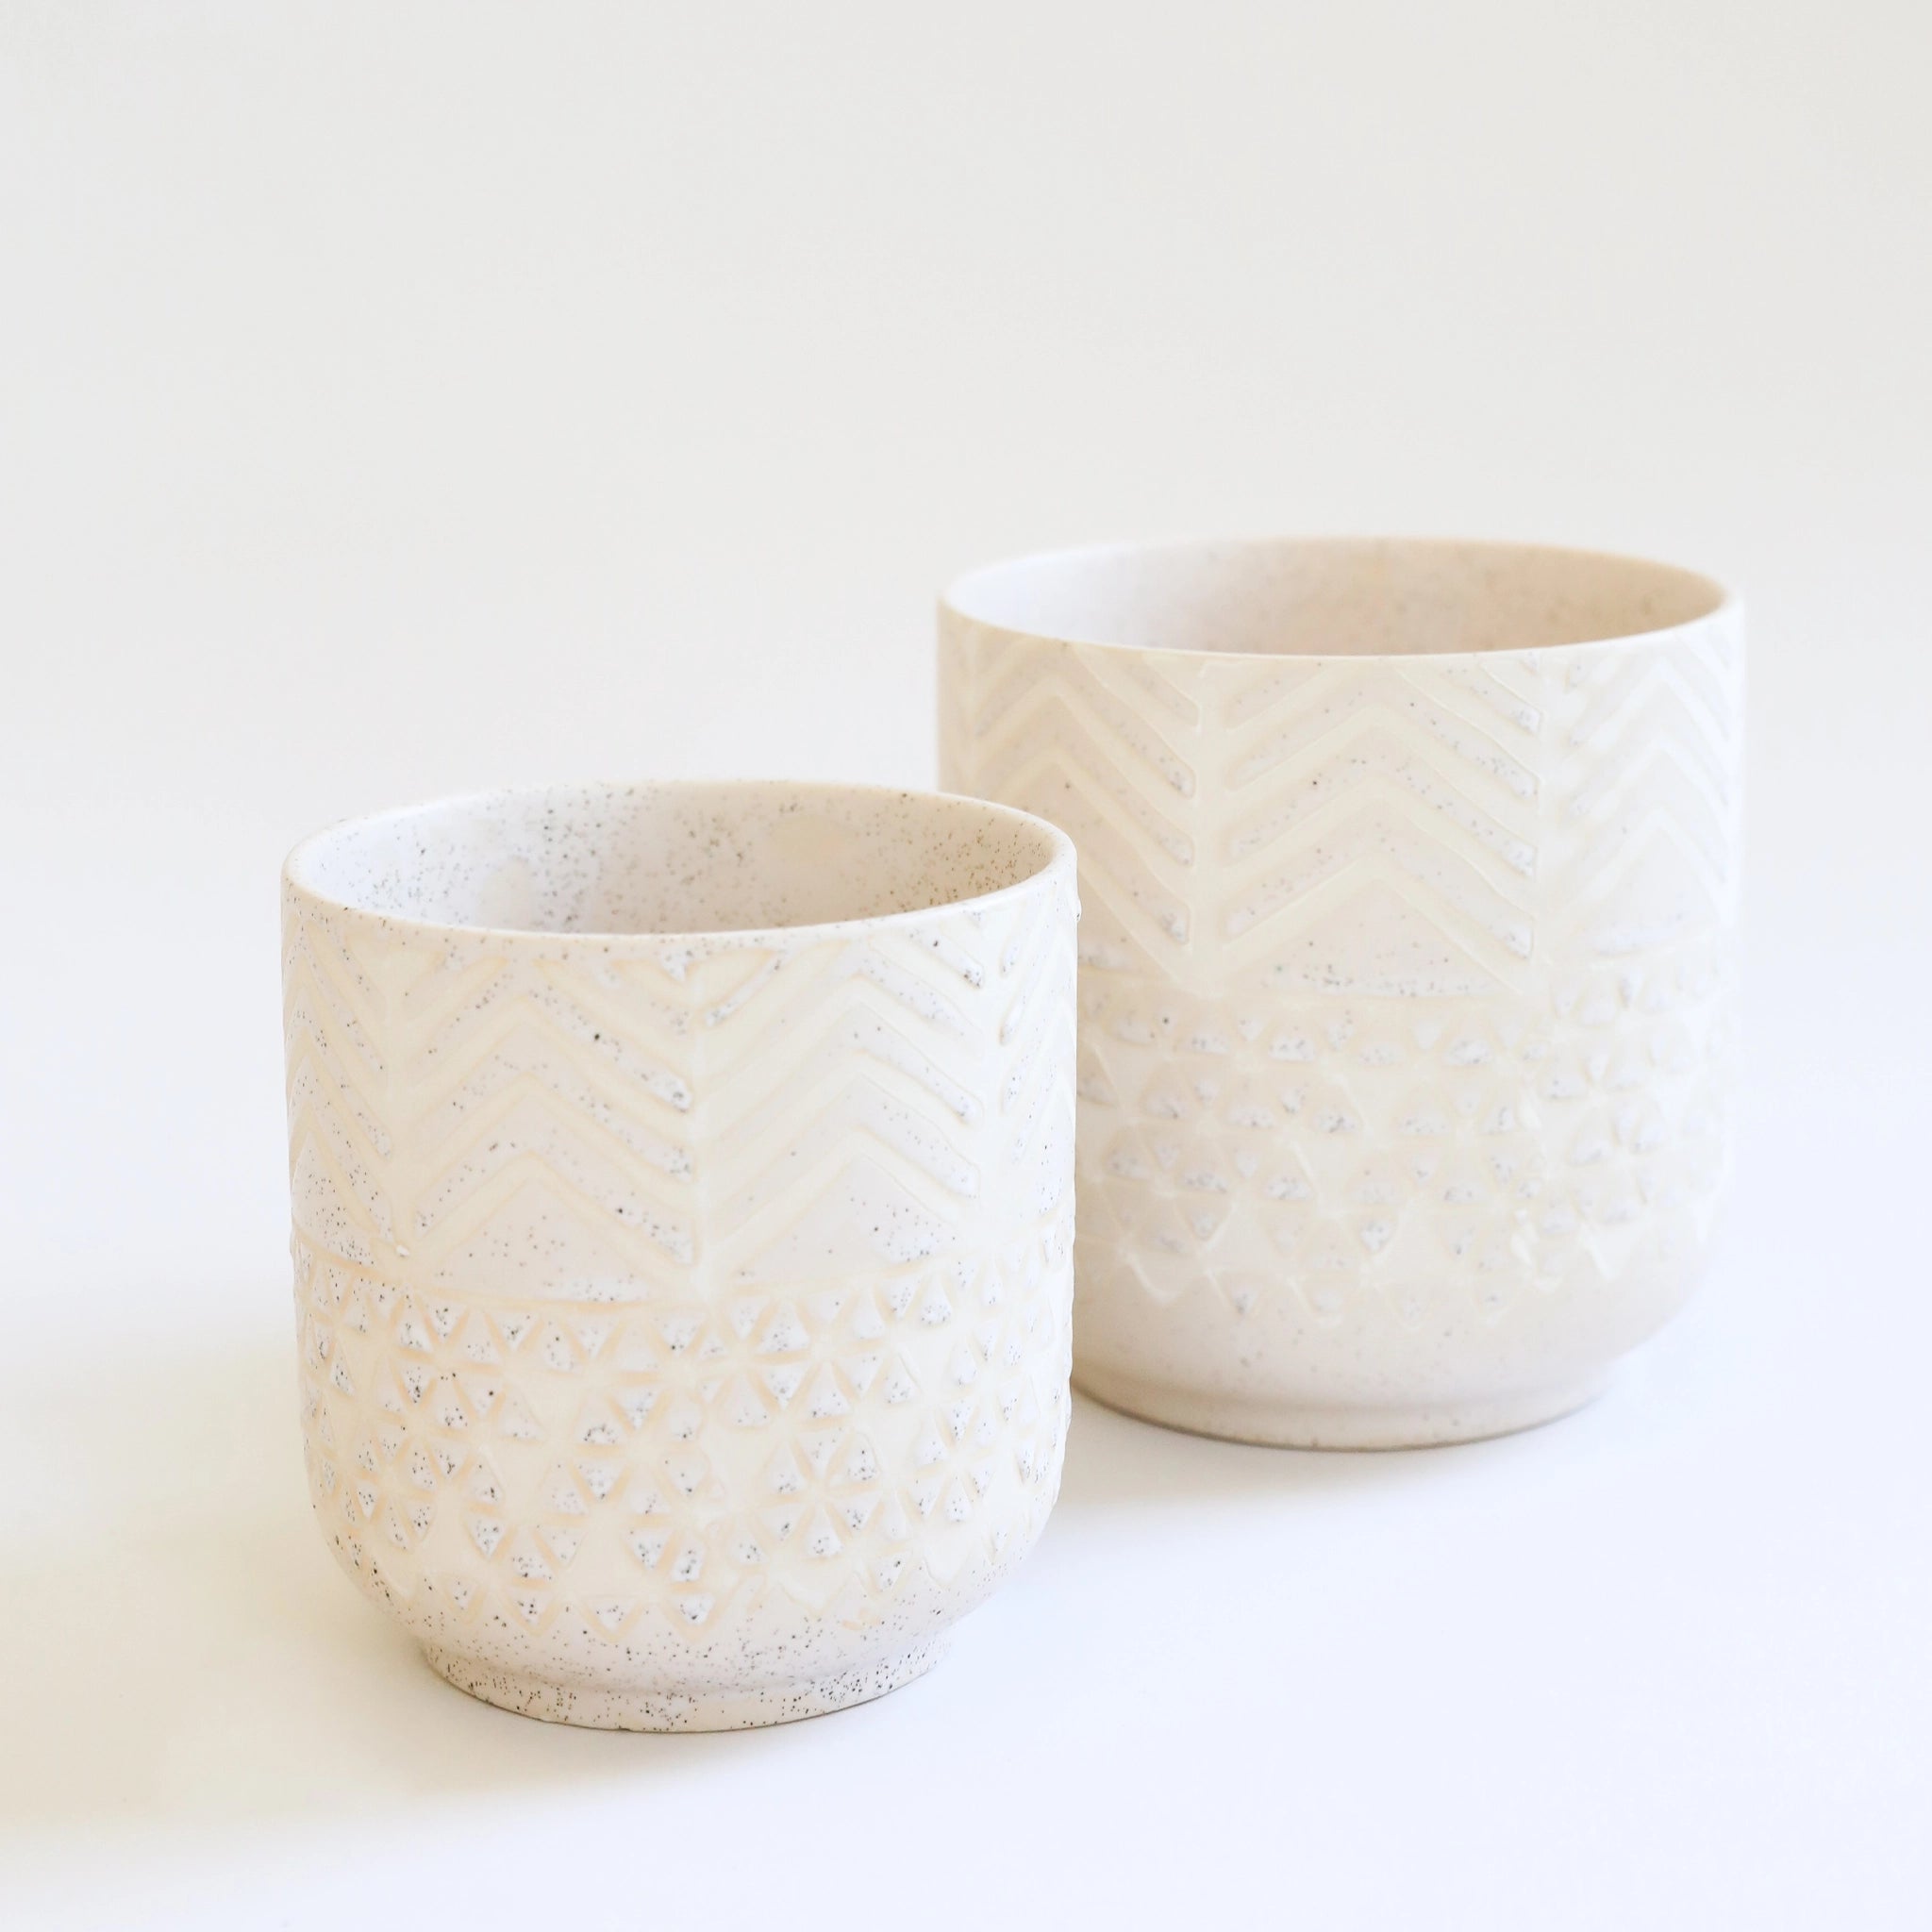 a smaller cream colored pot with chevron detail and speckles sits in front of a larger version of the same pot